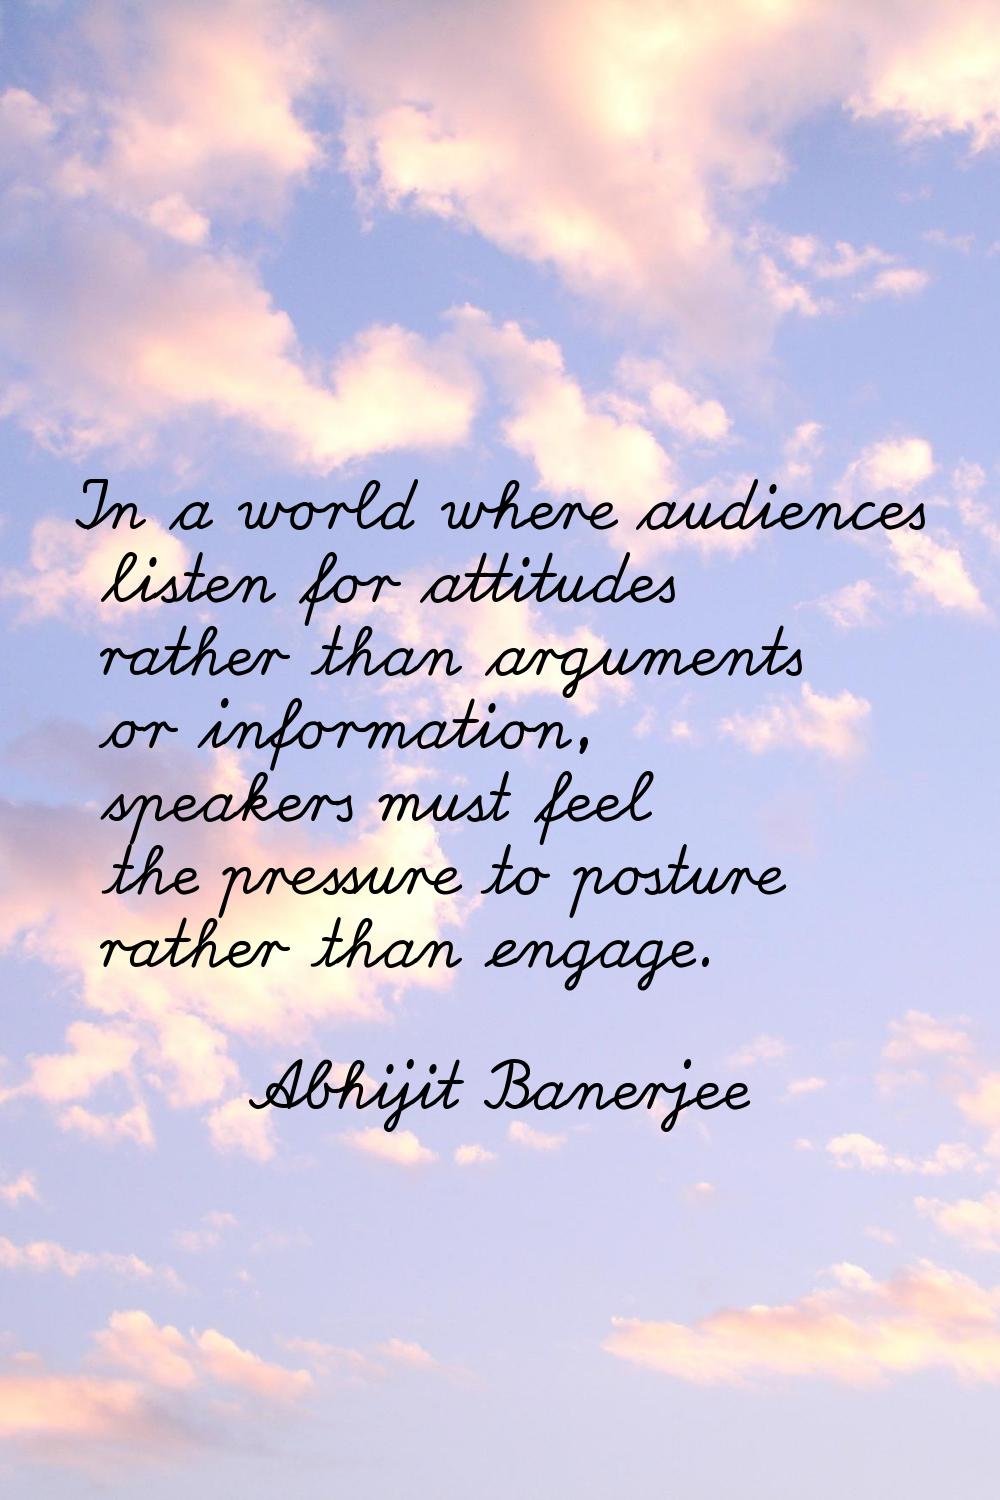 In a world where audiences listen for attitudes rather than arguments or information, speakers must